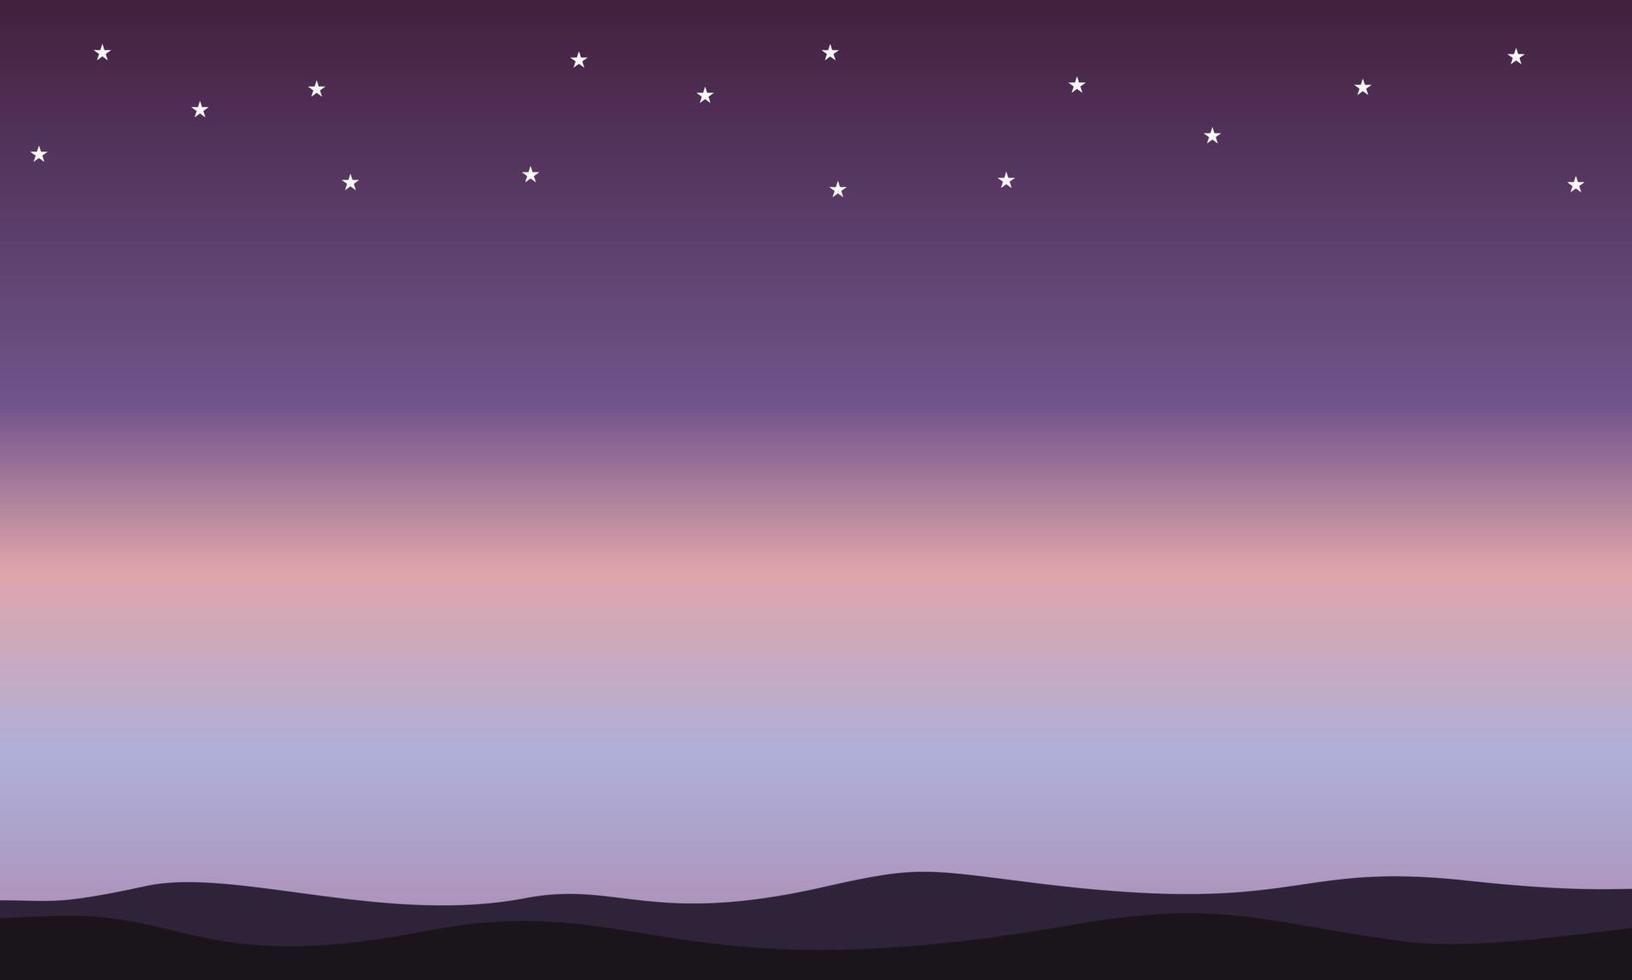 Violet night sky scenery background with mountains and stars Best for wallpaper, quotes, backdrop and card. vector